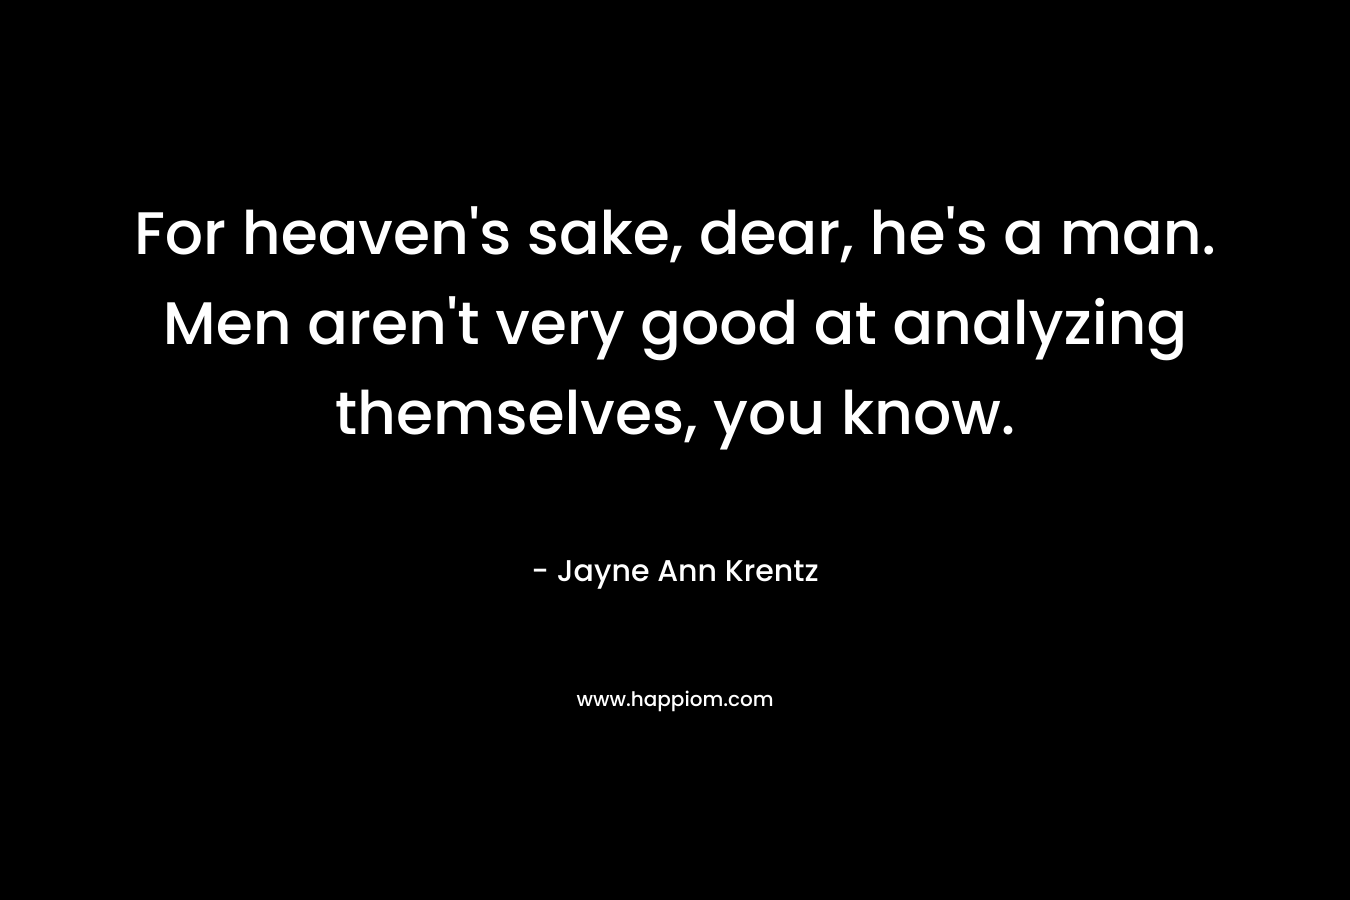 For heaven's sake, dear, he's a man. Men aren't very good at analyzing themselves, you know.